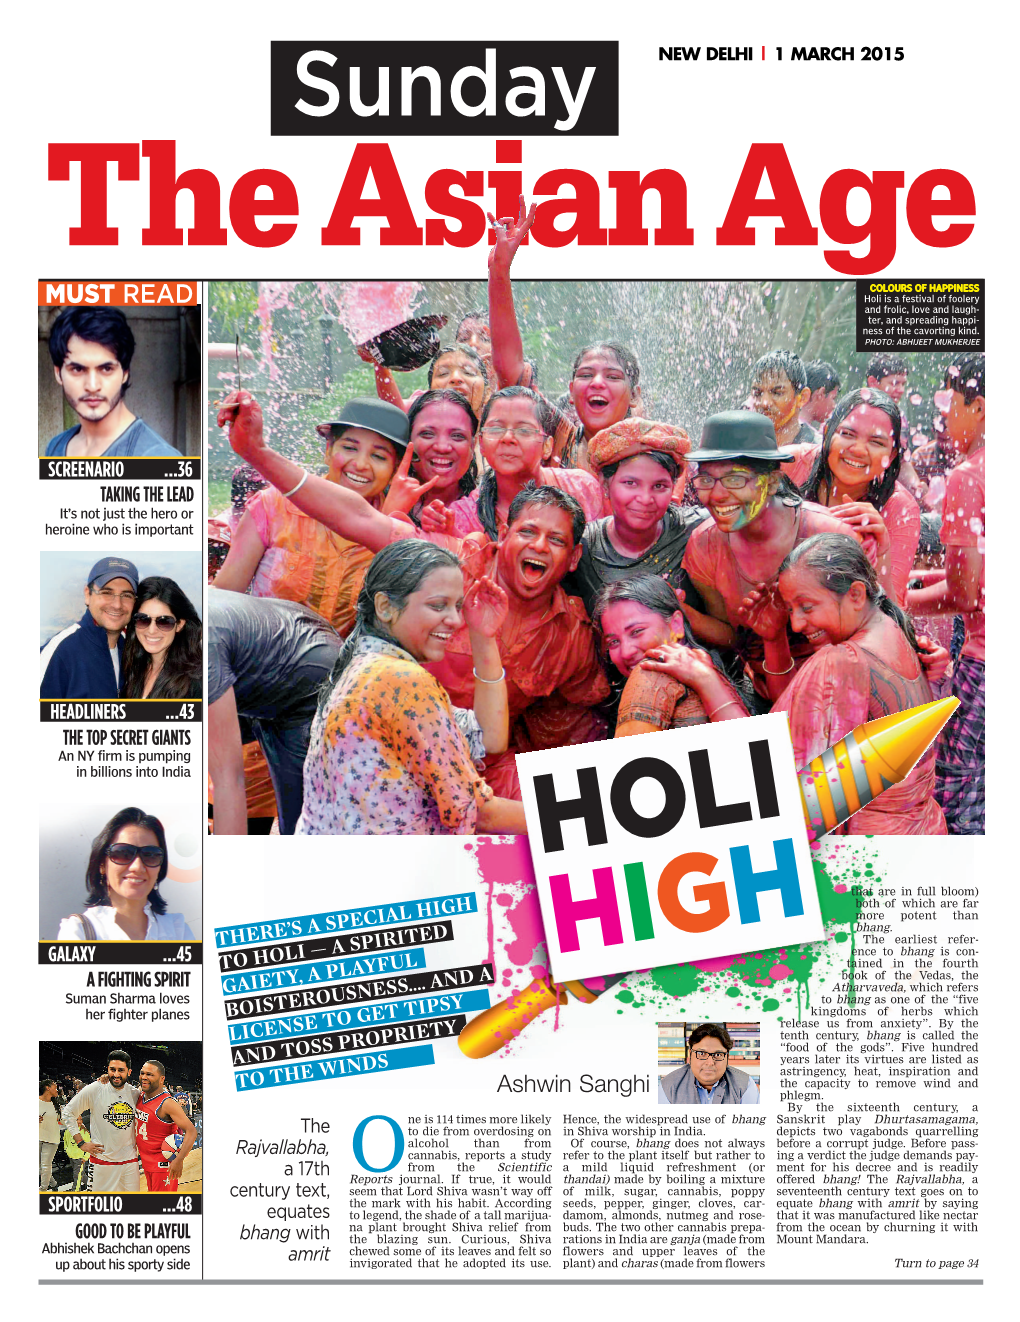 MUST READ Holi Is a Festival of Foolery and Frolic, Love and Laugh- Ter, and Spreading Happi- Ness of the Cavorting Kind